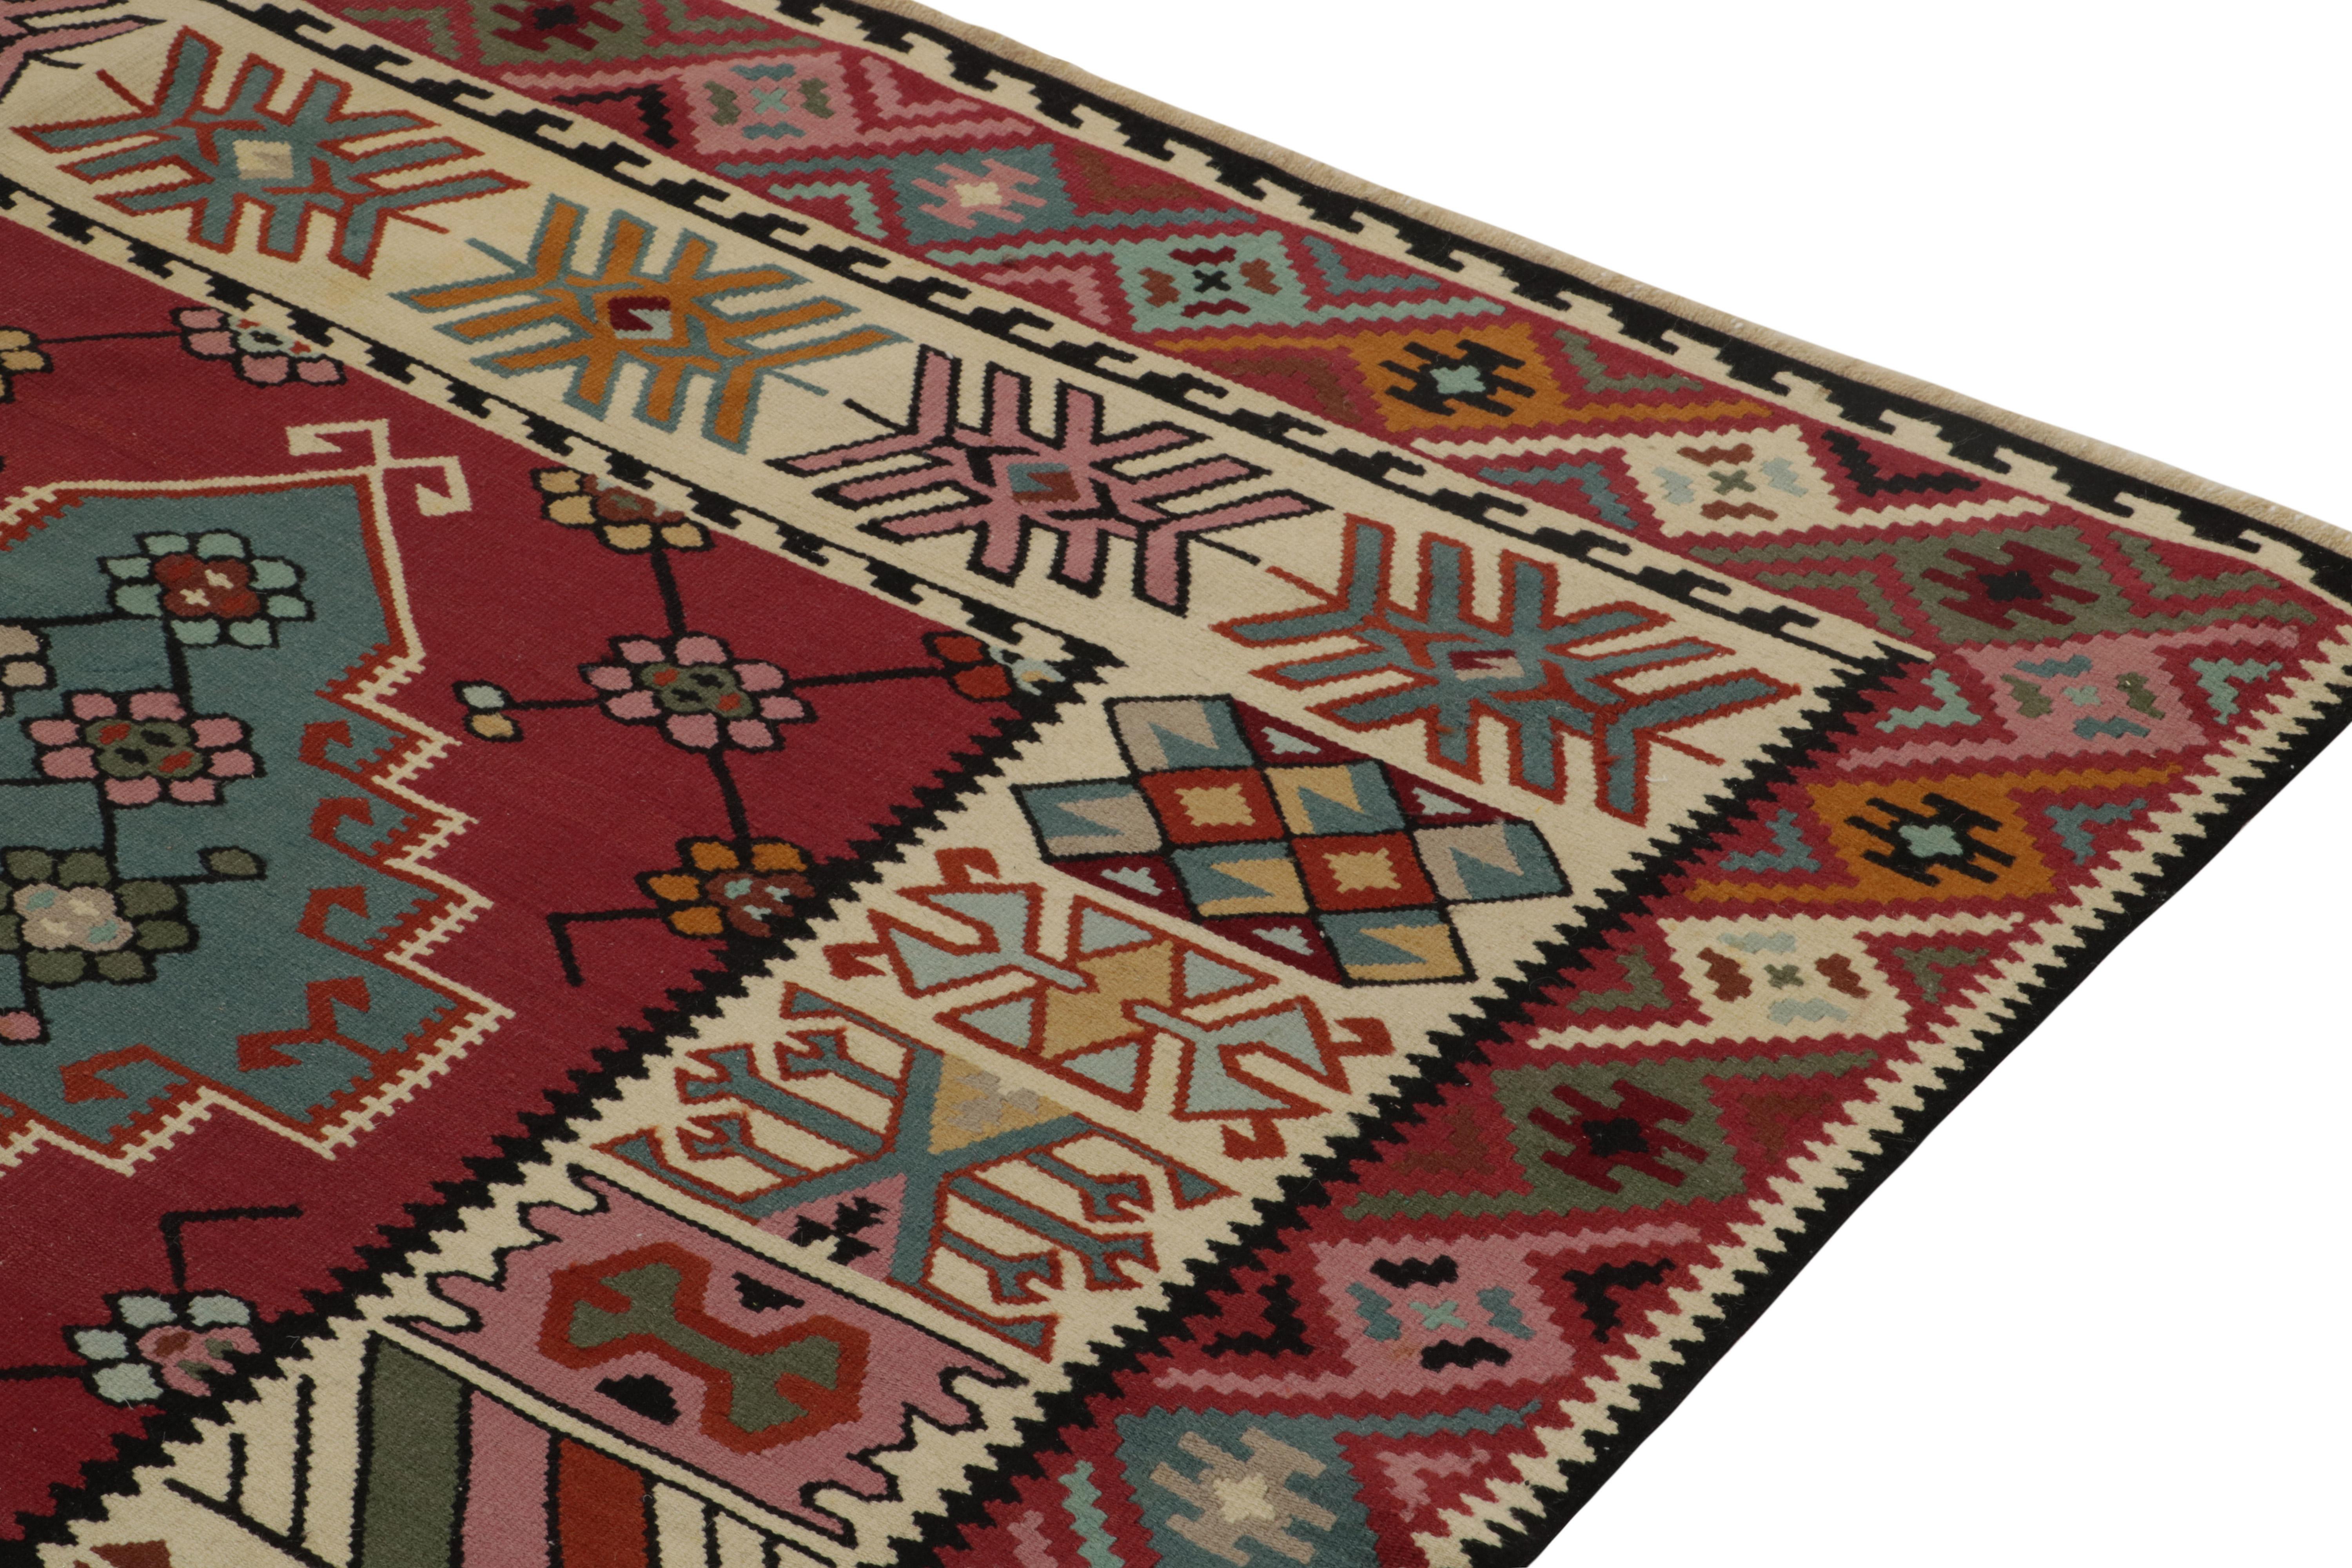 Late 19th Century Antique Persian Kilim rug in Burgundy & Blue Geometric pattern by Rug & Kilim For Sale